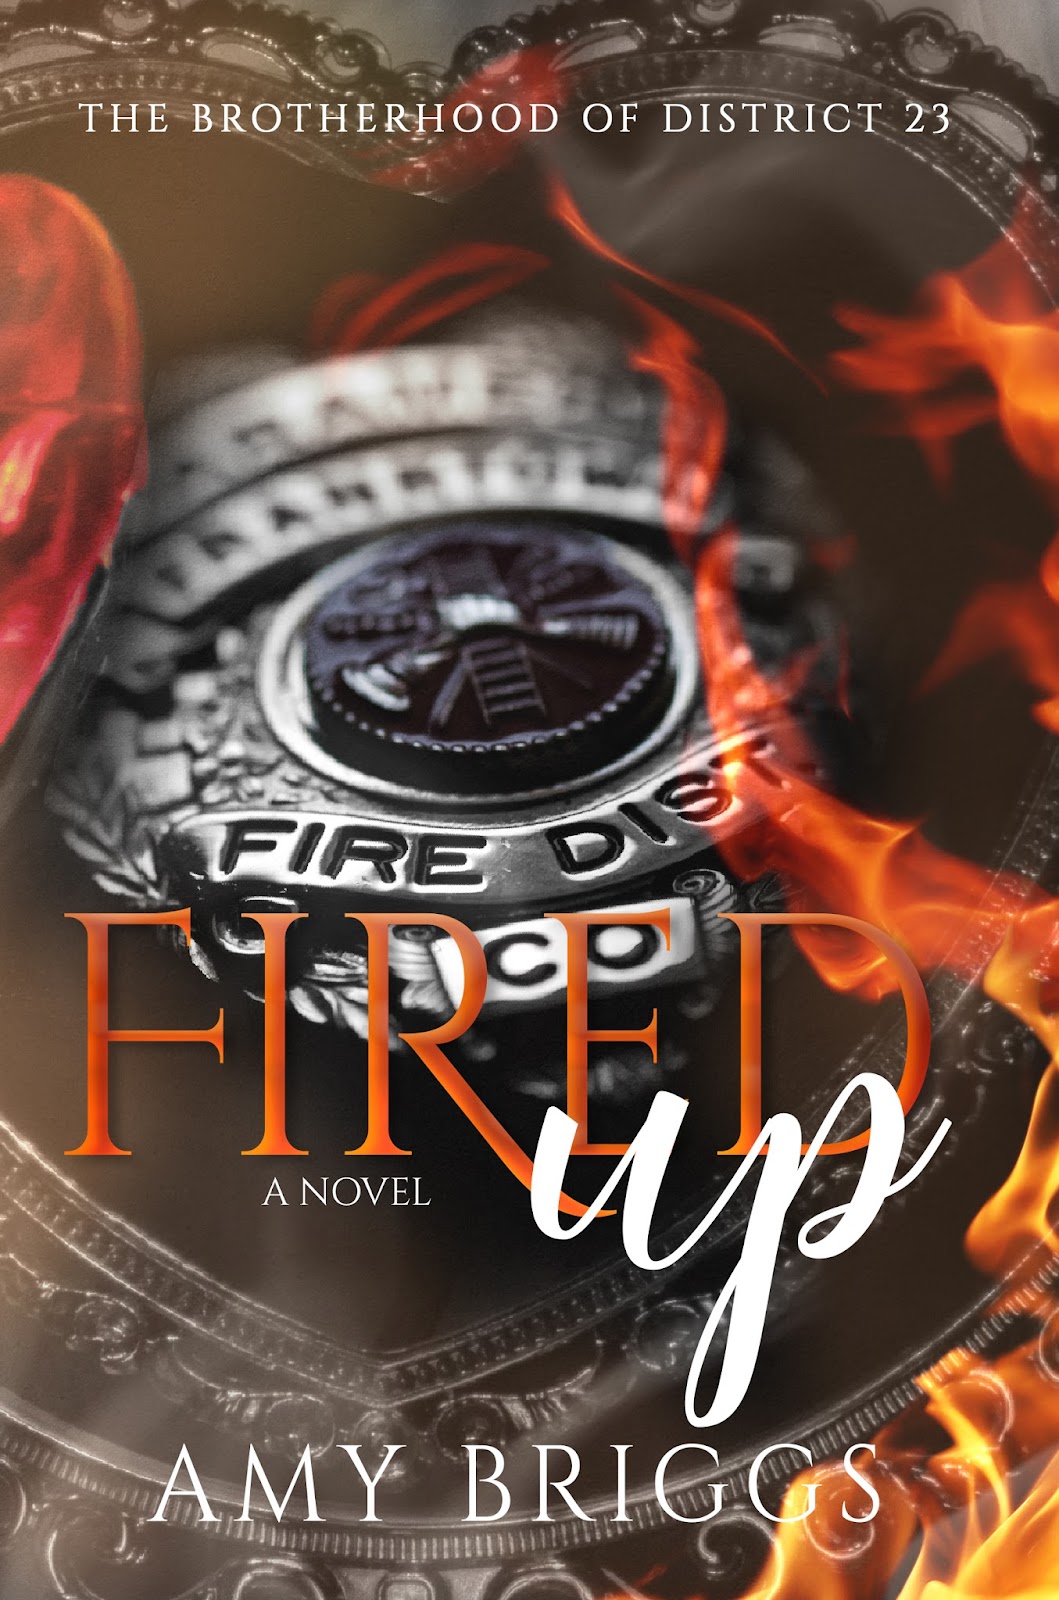 Fired Up - EBOOK COVER.jpg